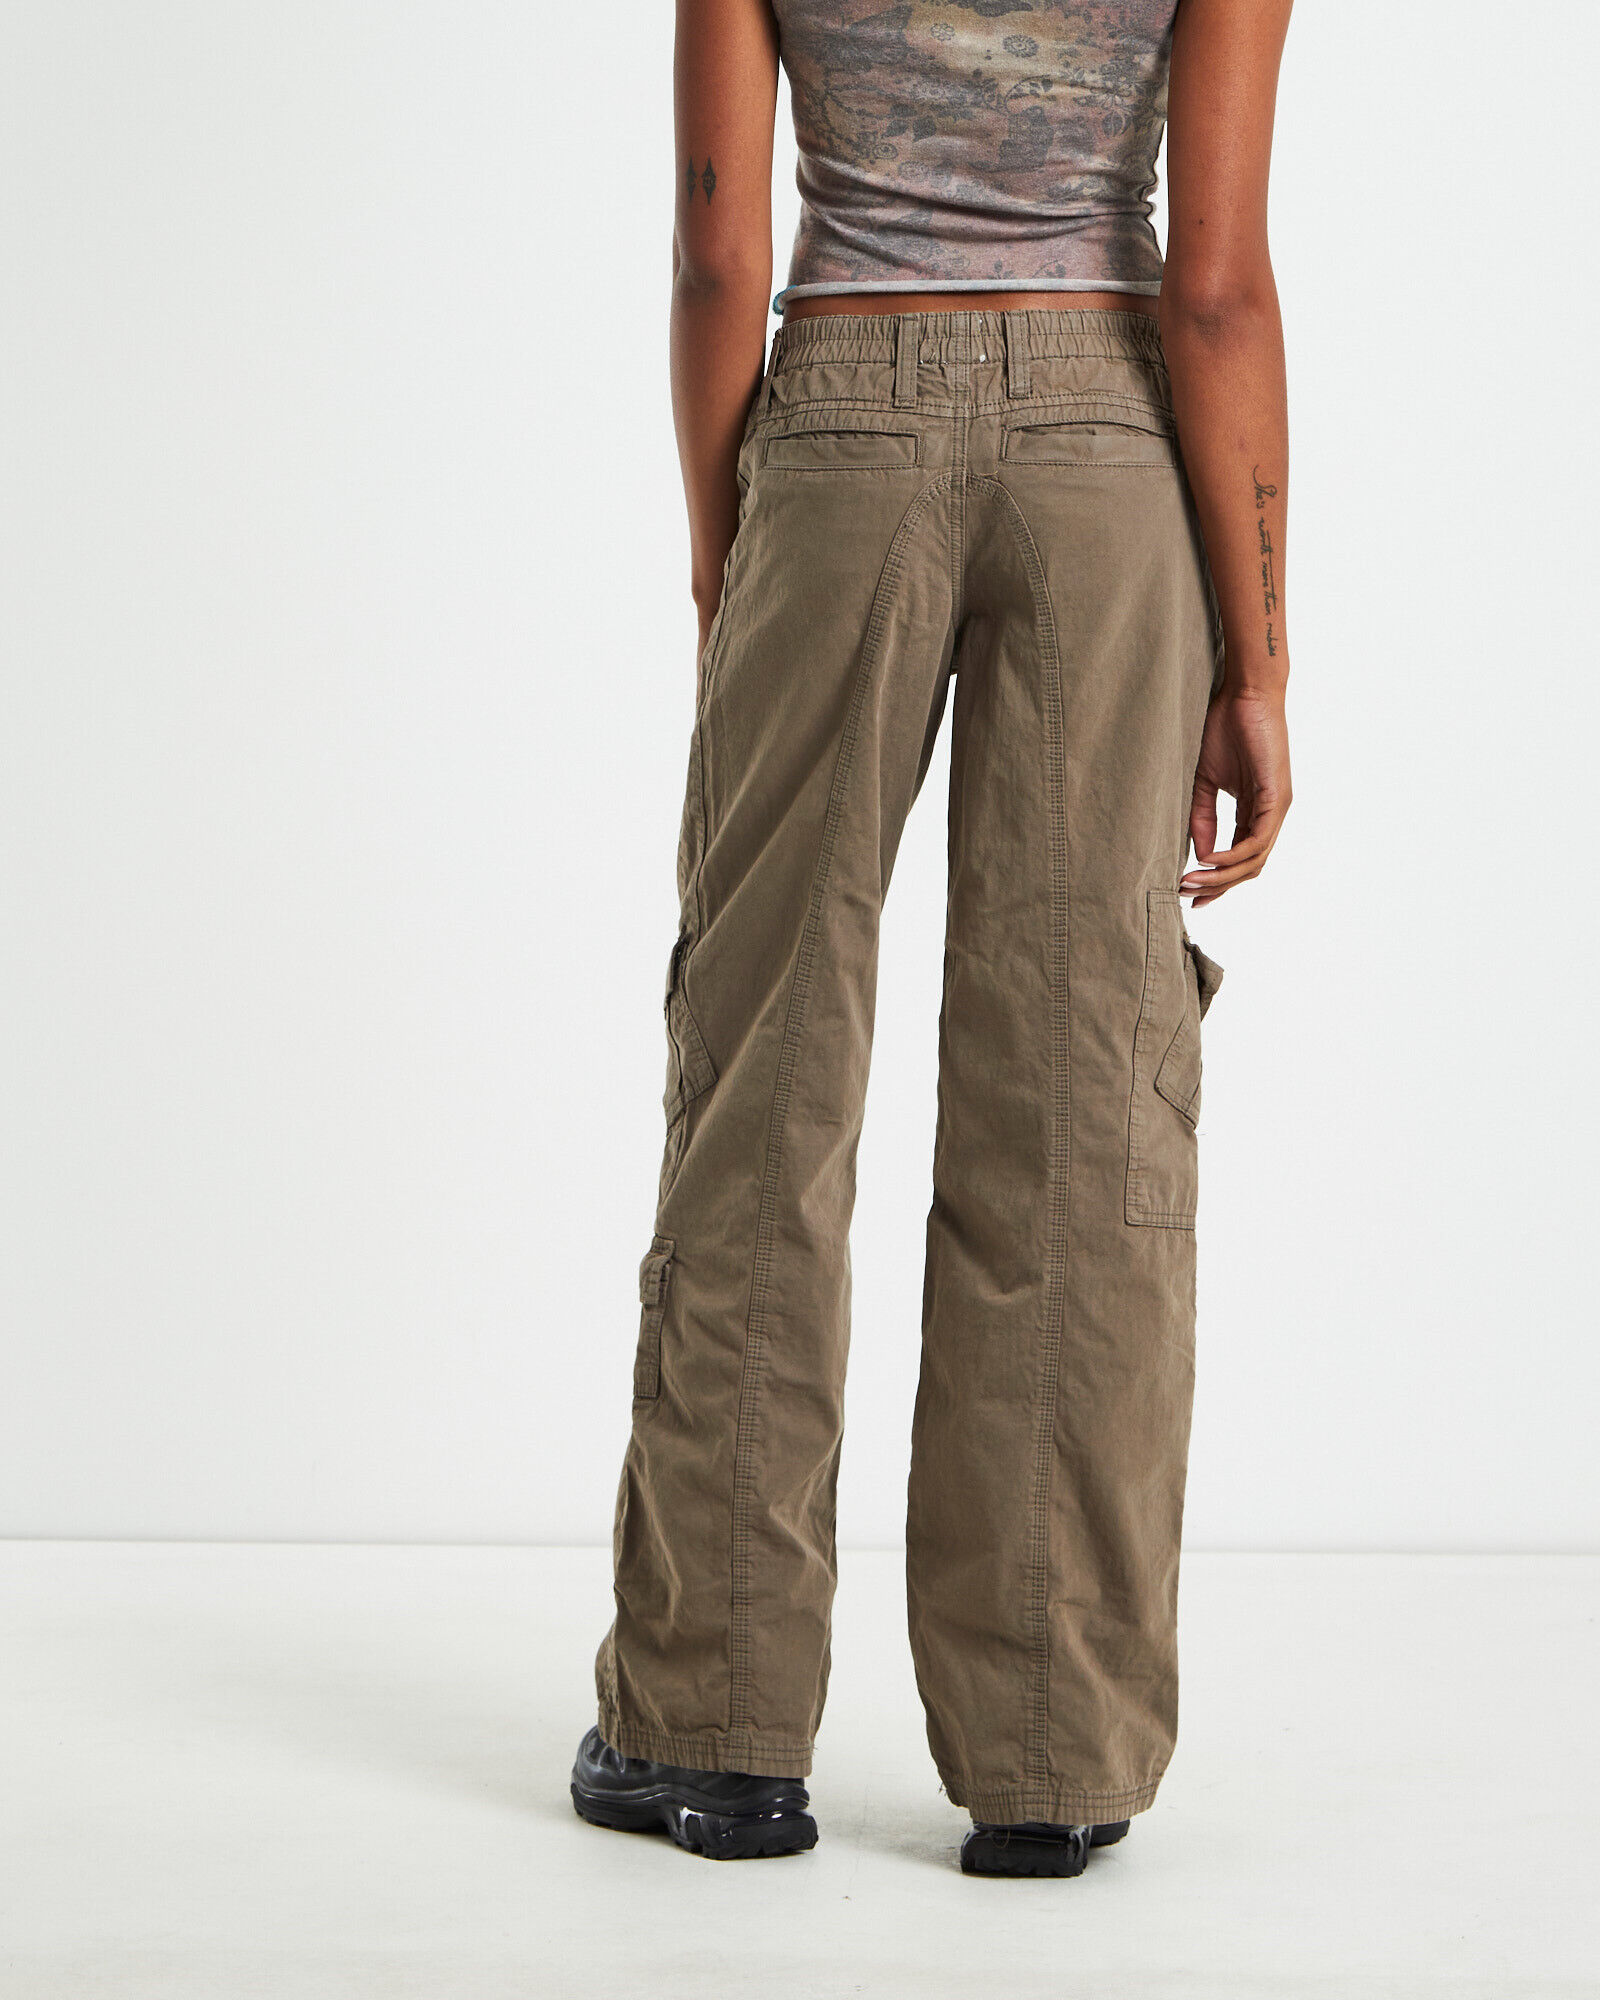 GODLIKEU Mens Cargo Pants Stretchy, Multi Pockets, Straight Skinny Fit For  Summer And Winter Sports And Fitness Track Cargo Trousers Primark From  Godlikeu, $4.87 | DHgate.Com